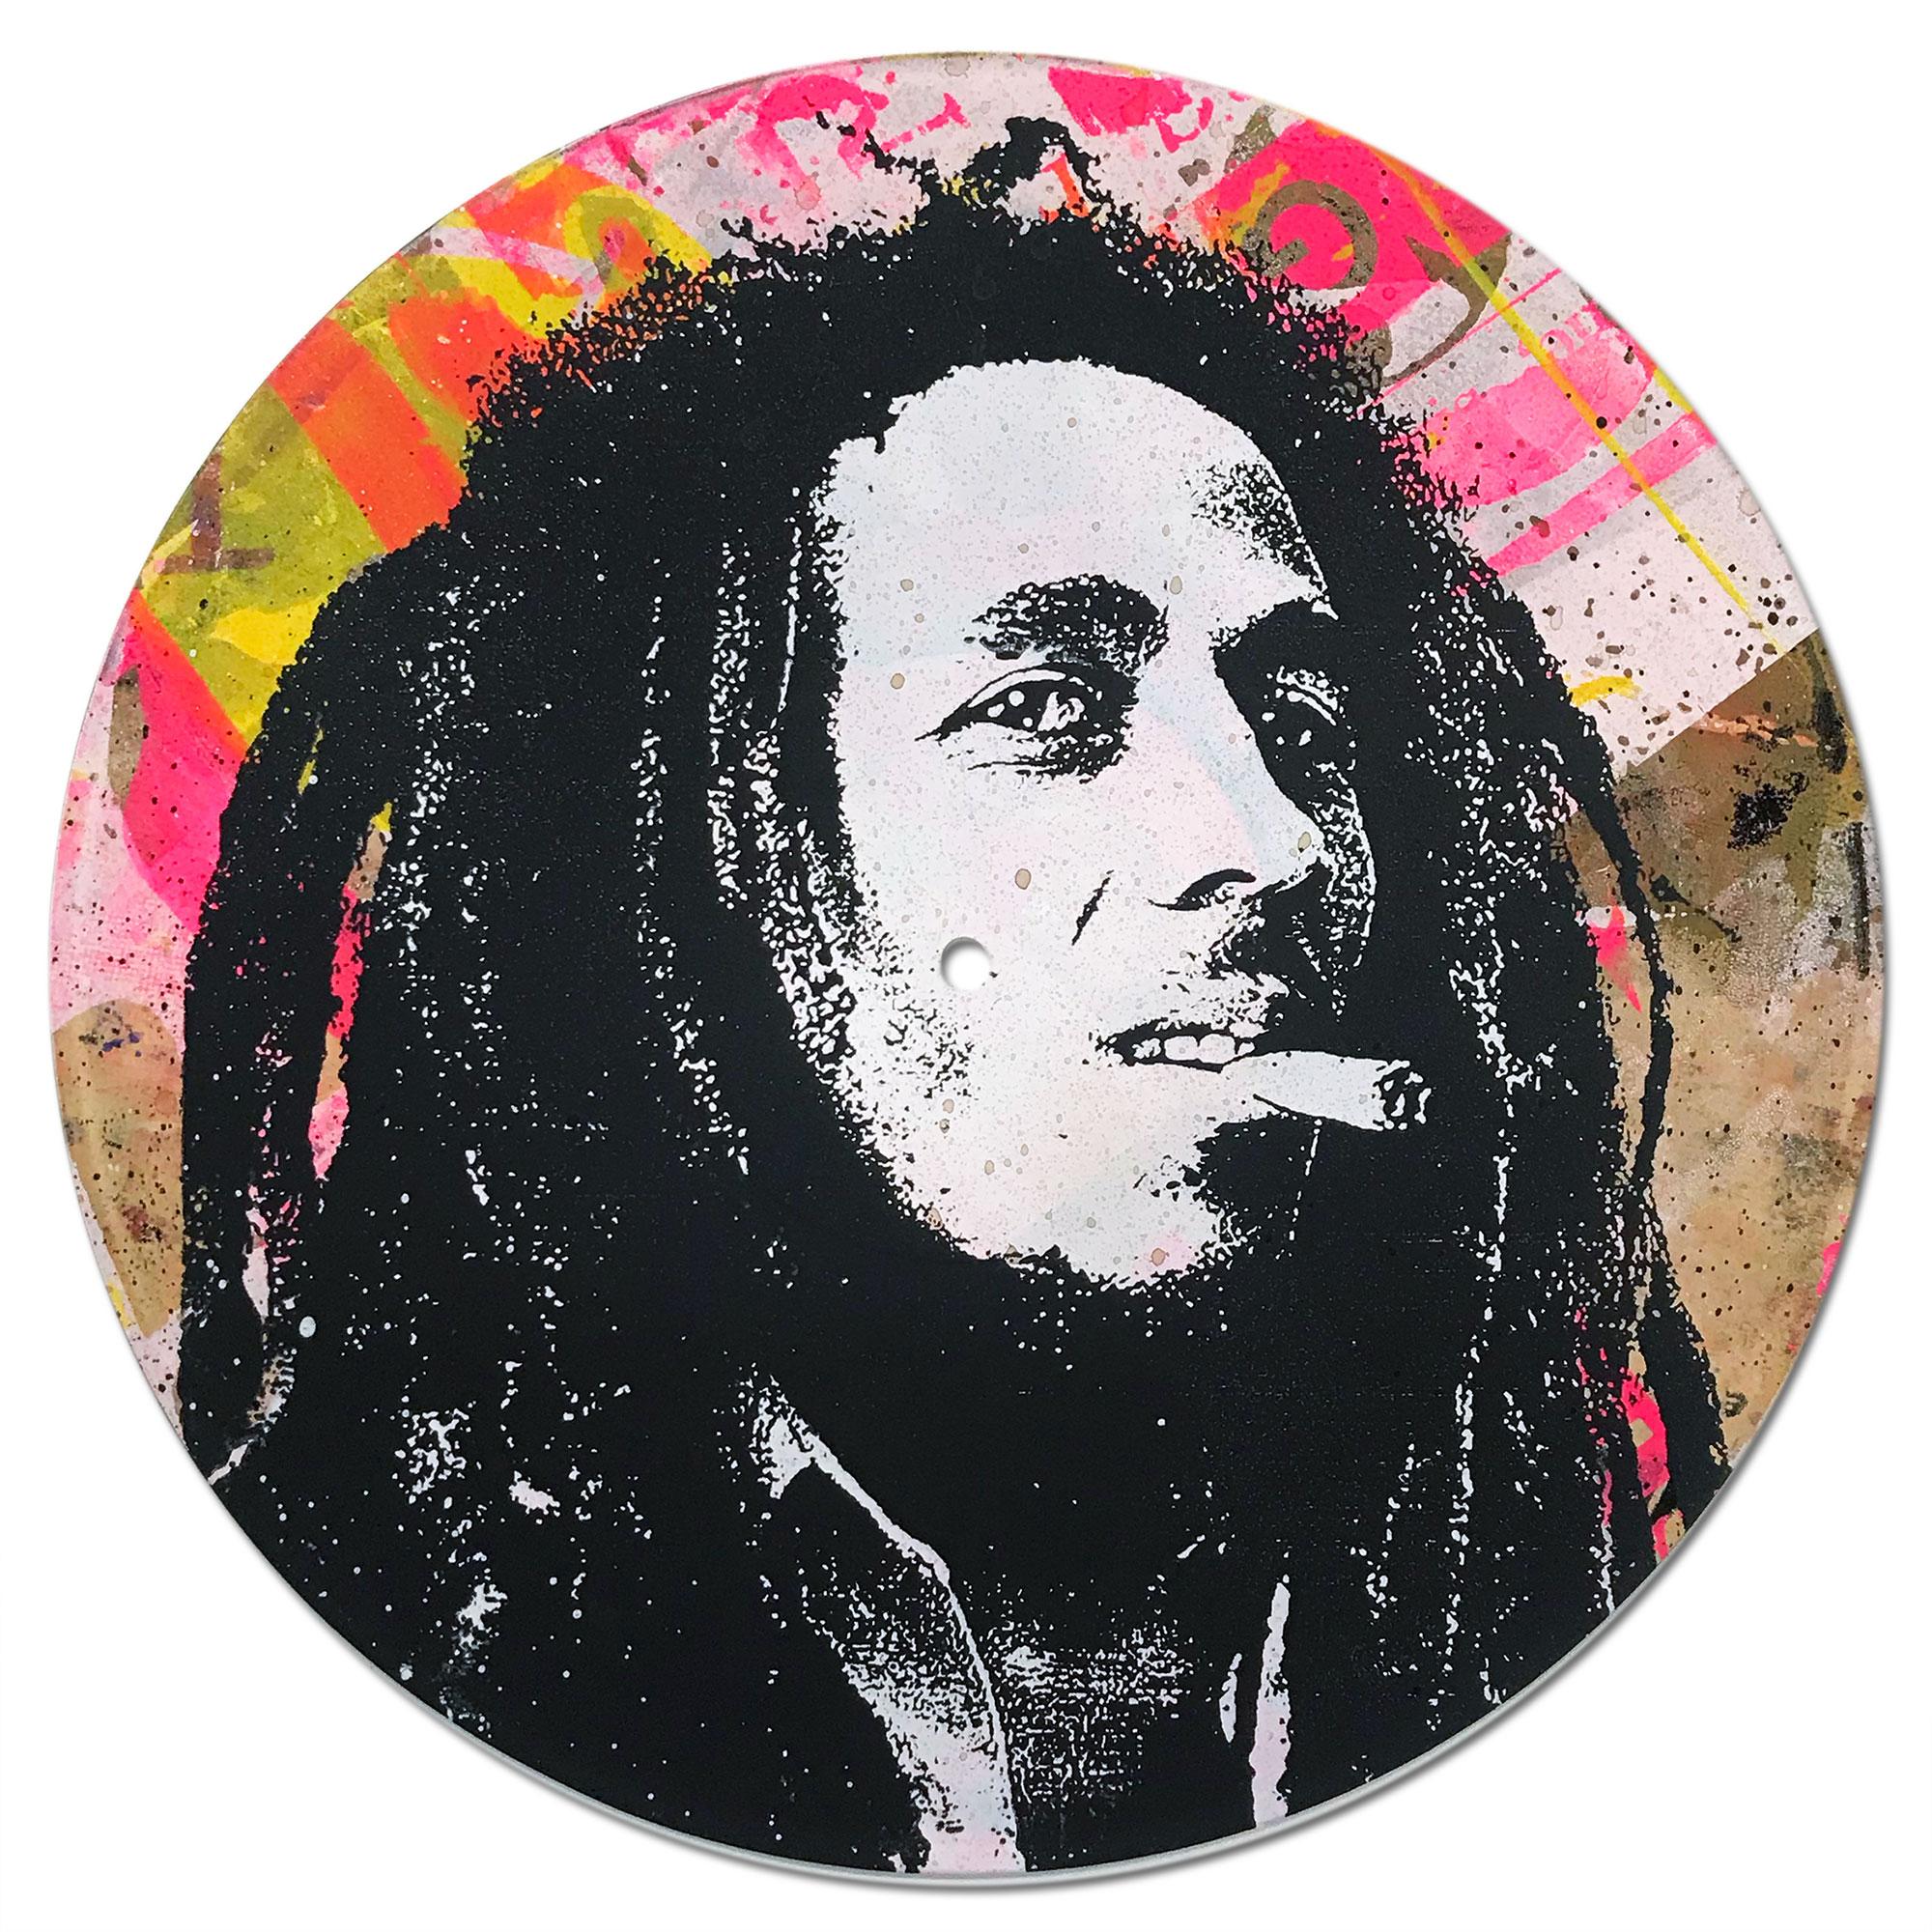 Bob Marley Vinyl 1-10, Greg Gossel Pop Art LP Record (Singles & Sets Available)

Editions Available: 1,2,3,5,6,7,8,9,10

These vinyl LP's were created for Greg Gossel's show 